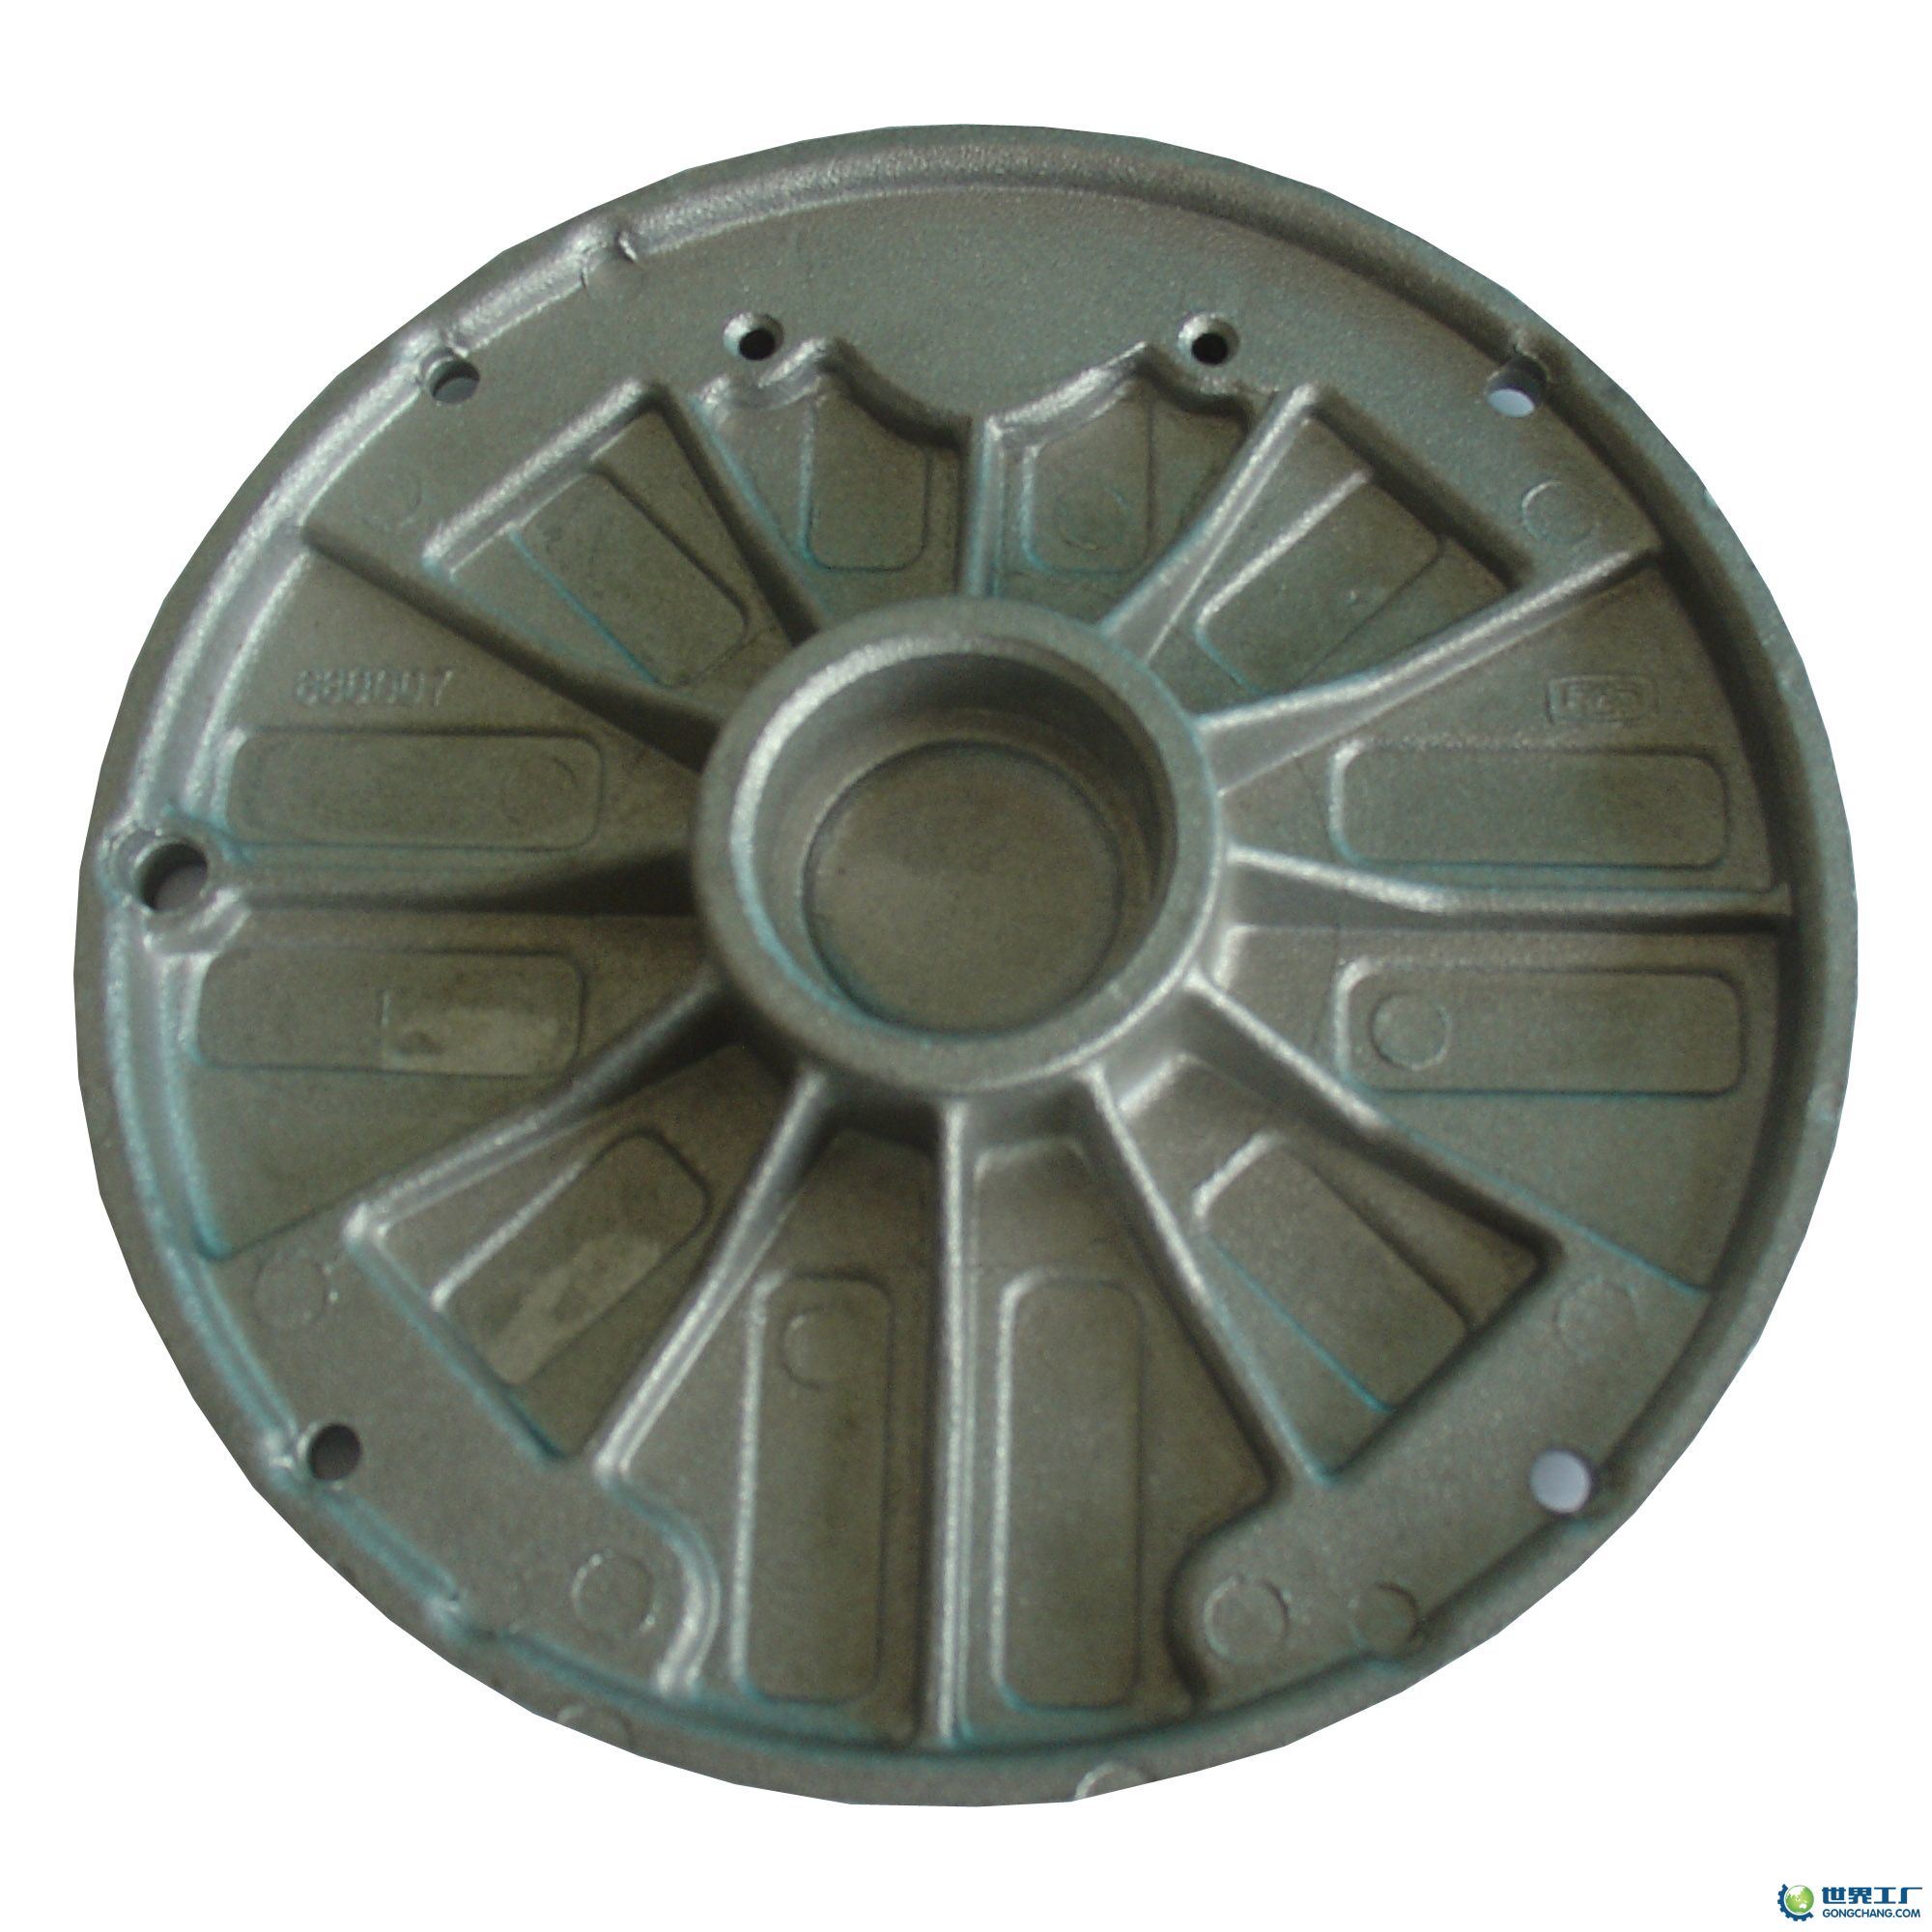 Aluminu Electromotor Cover Made by Gravity Casting (E030622)